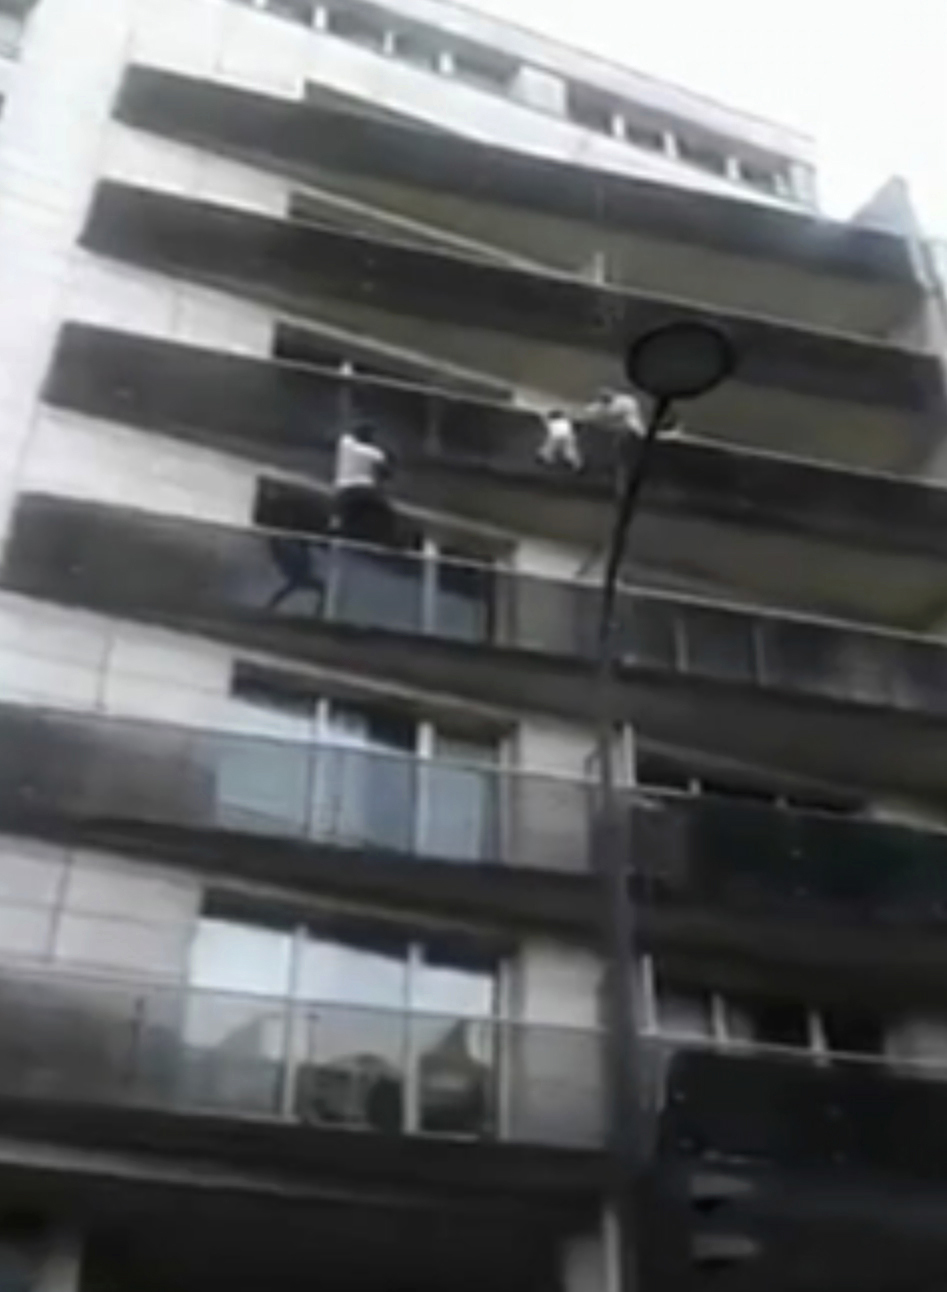 Mamoudou Gassama scales an apartment building to save a young child (AP)